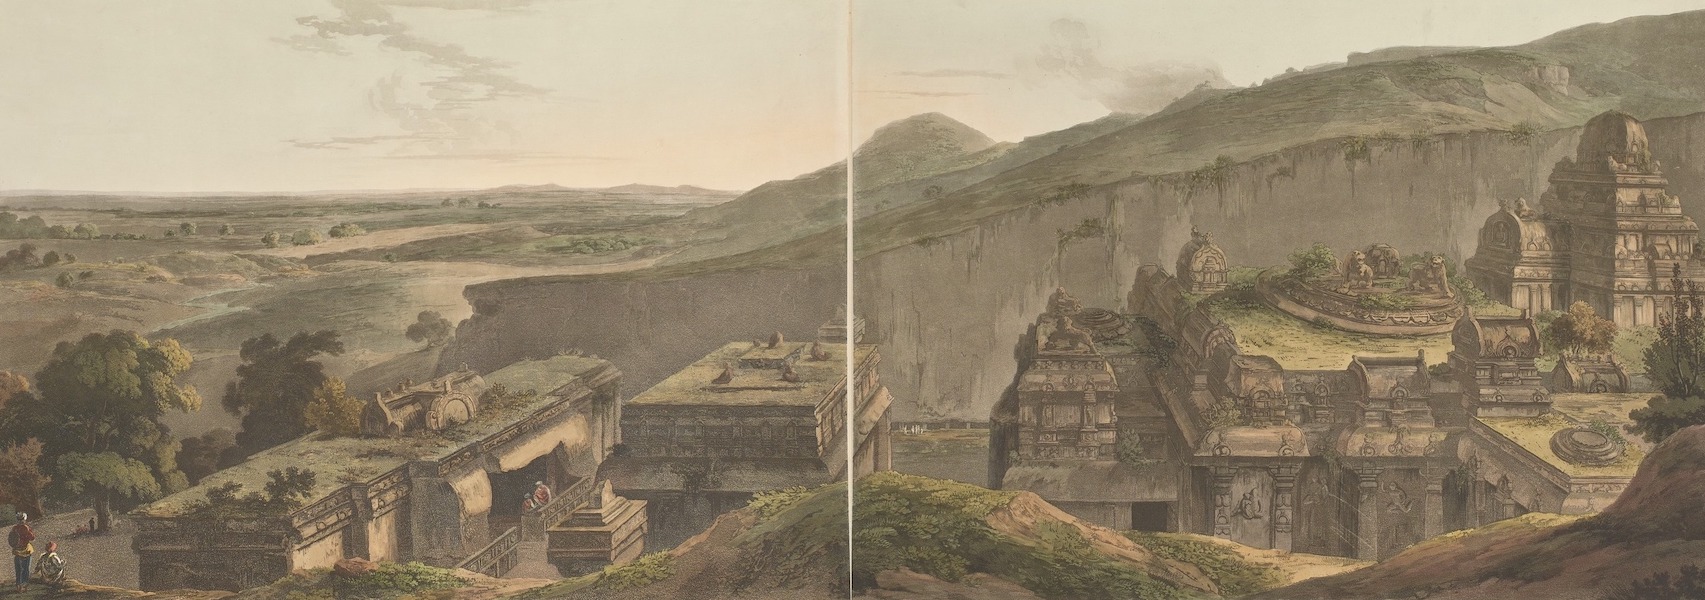 The Upper Part Of Kailâsa [Composite]